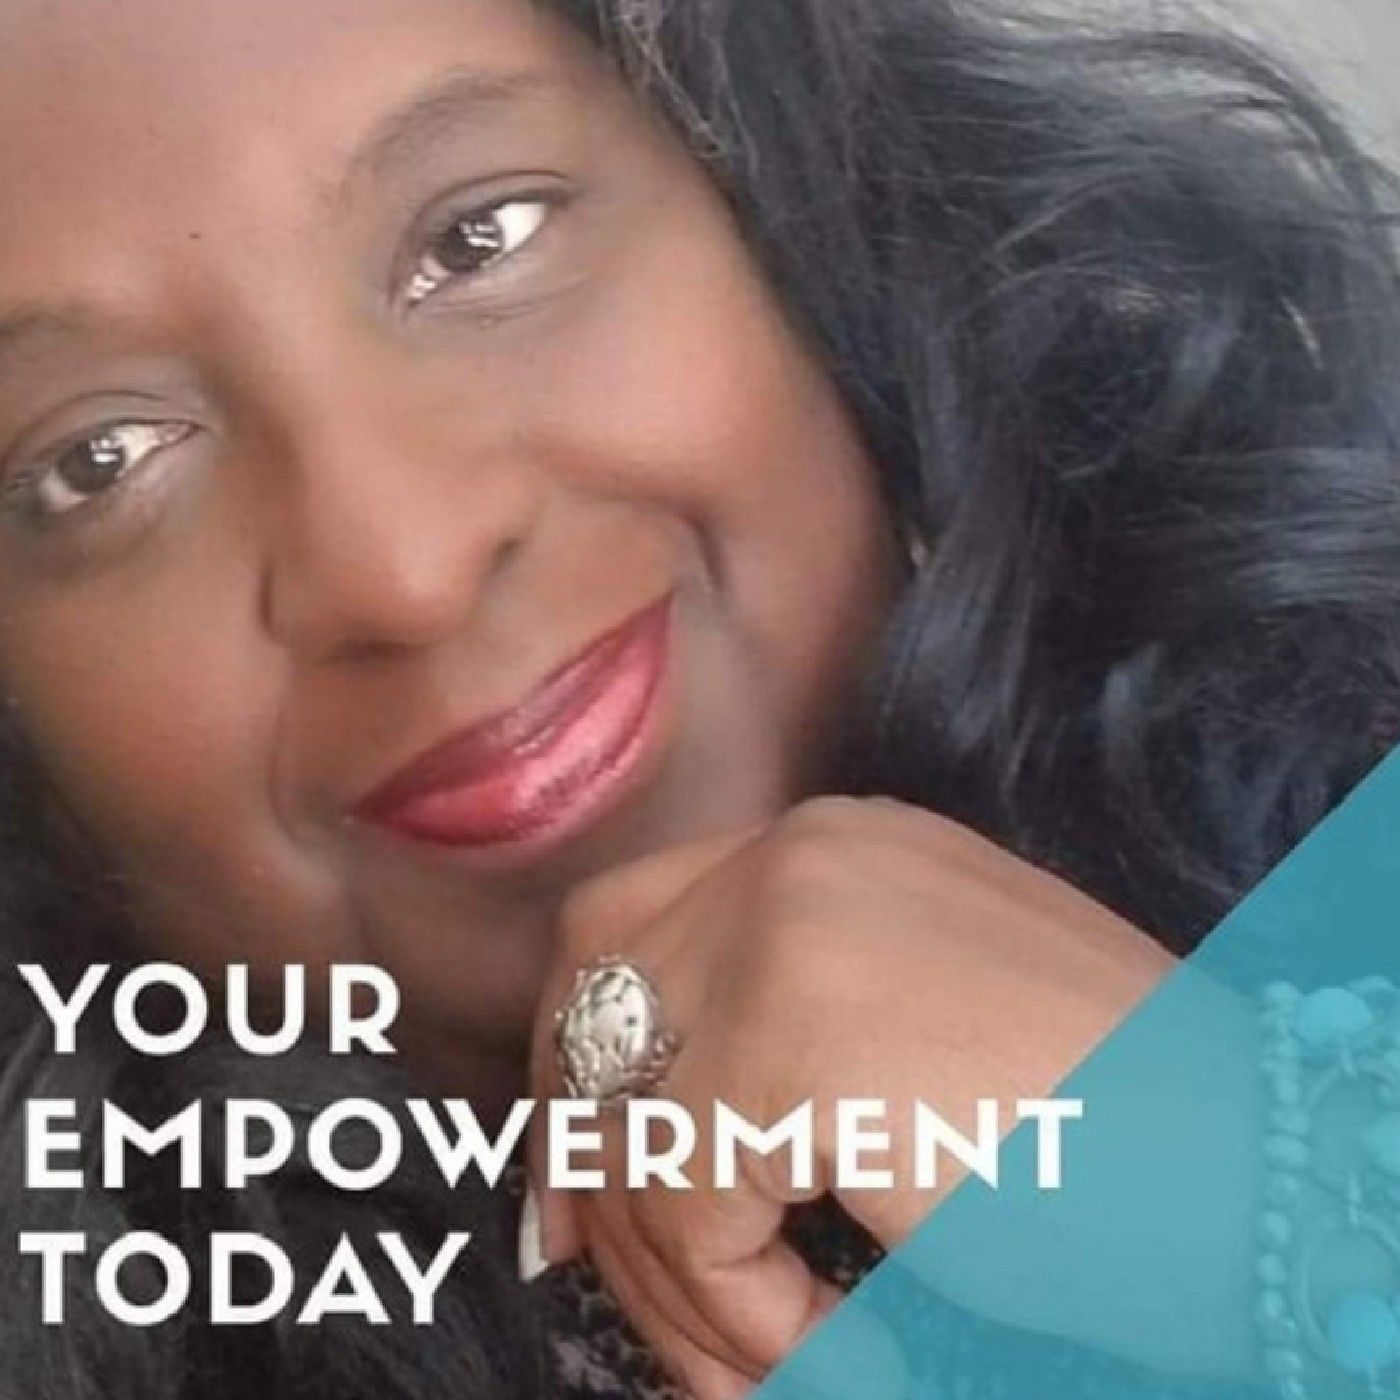 Your Empowerment Today